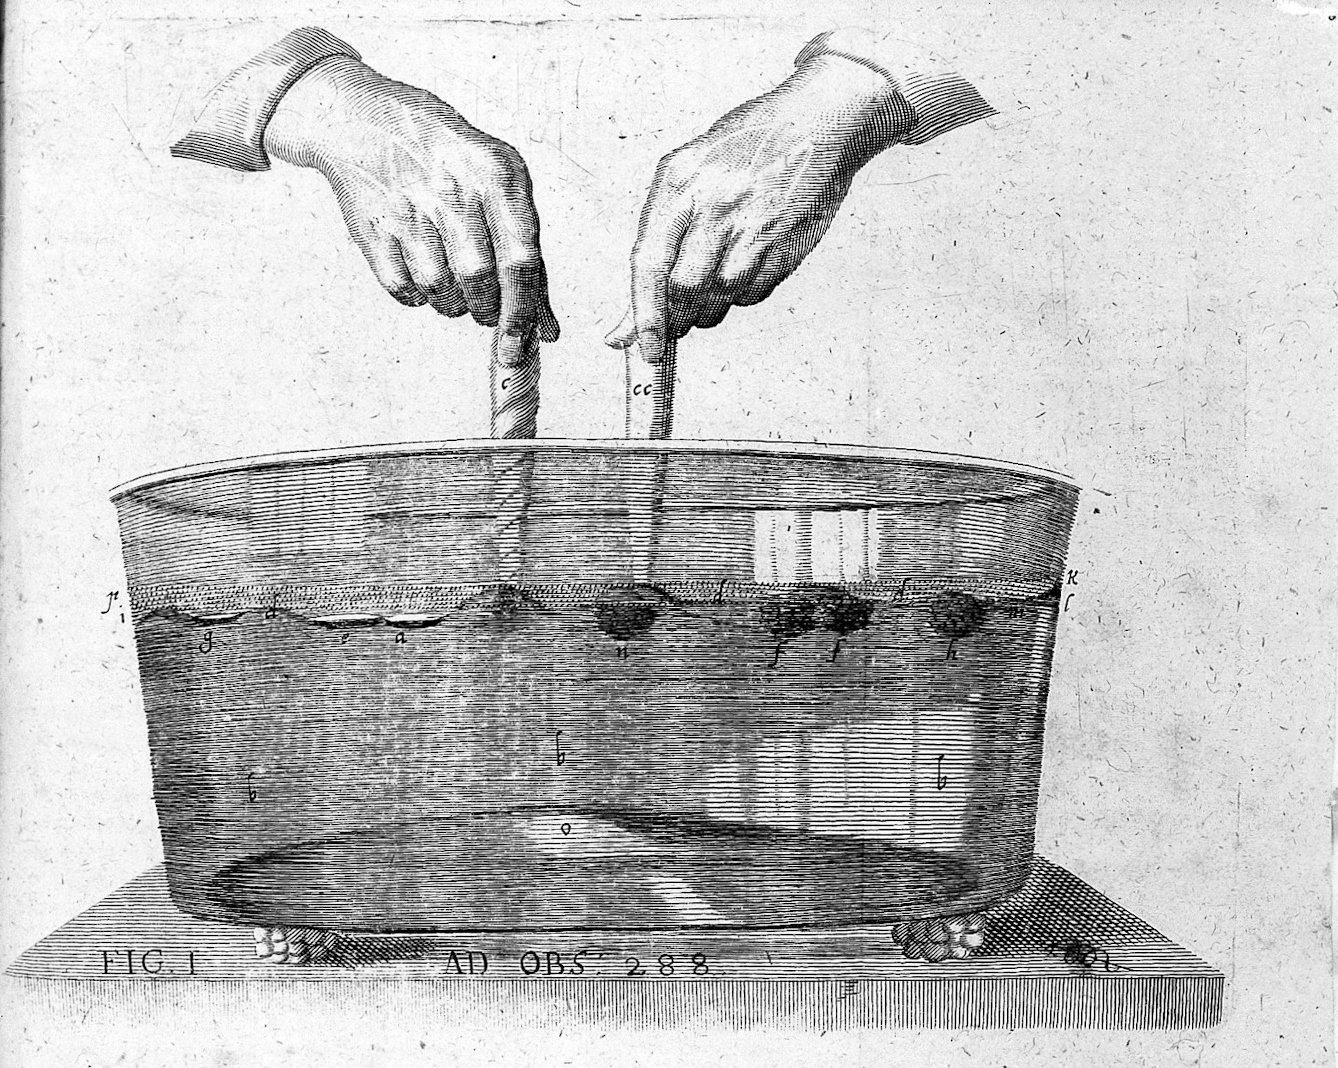 Engraving of hands holding two horns, one spiralling like a unicorn horn, in a tub of liquid.